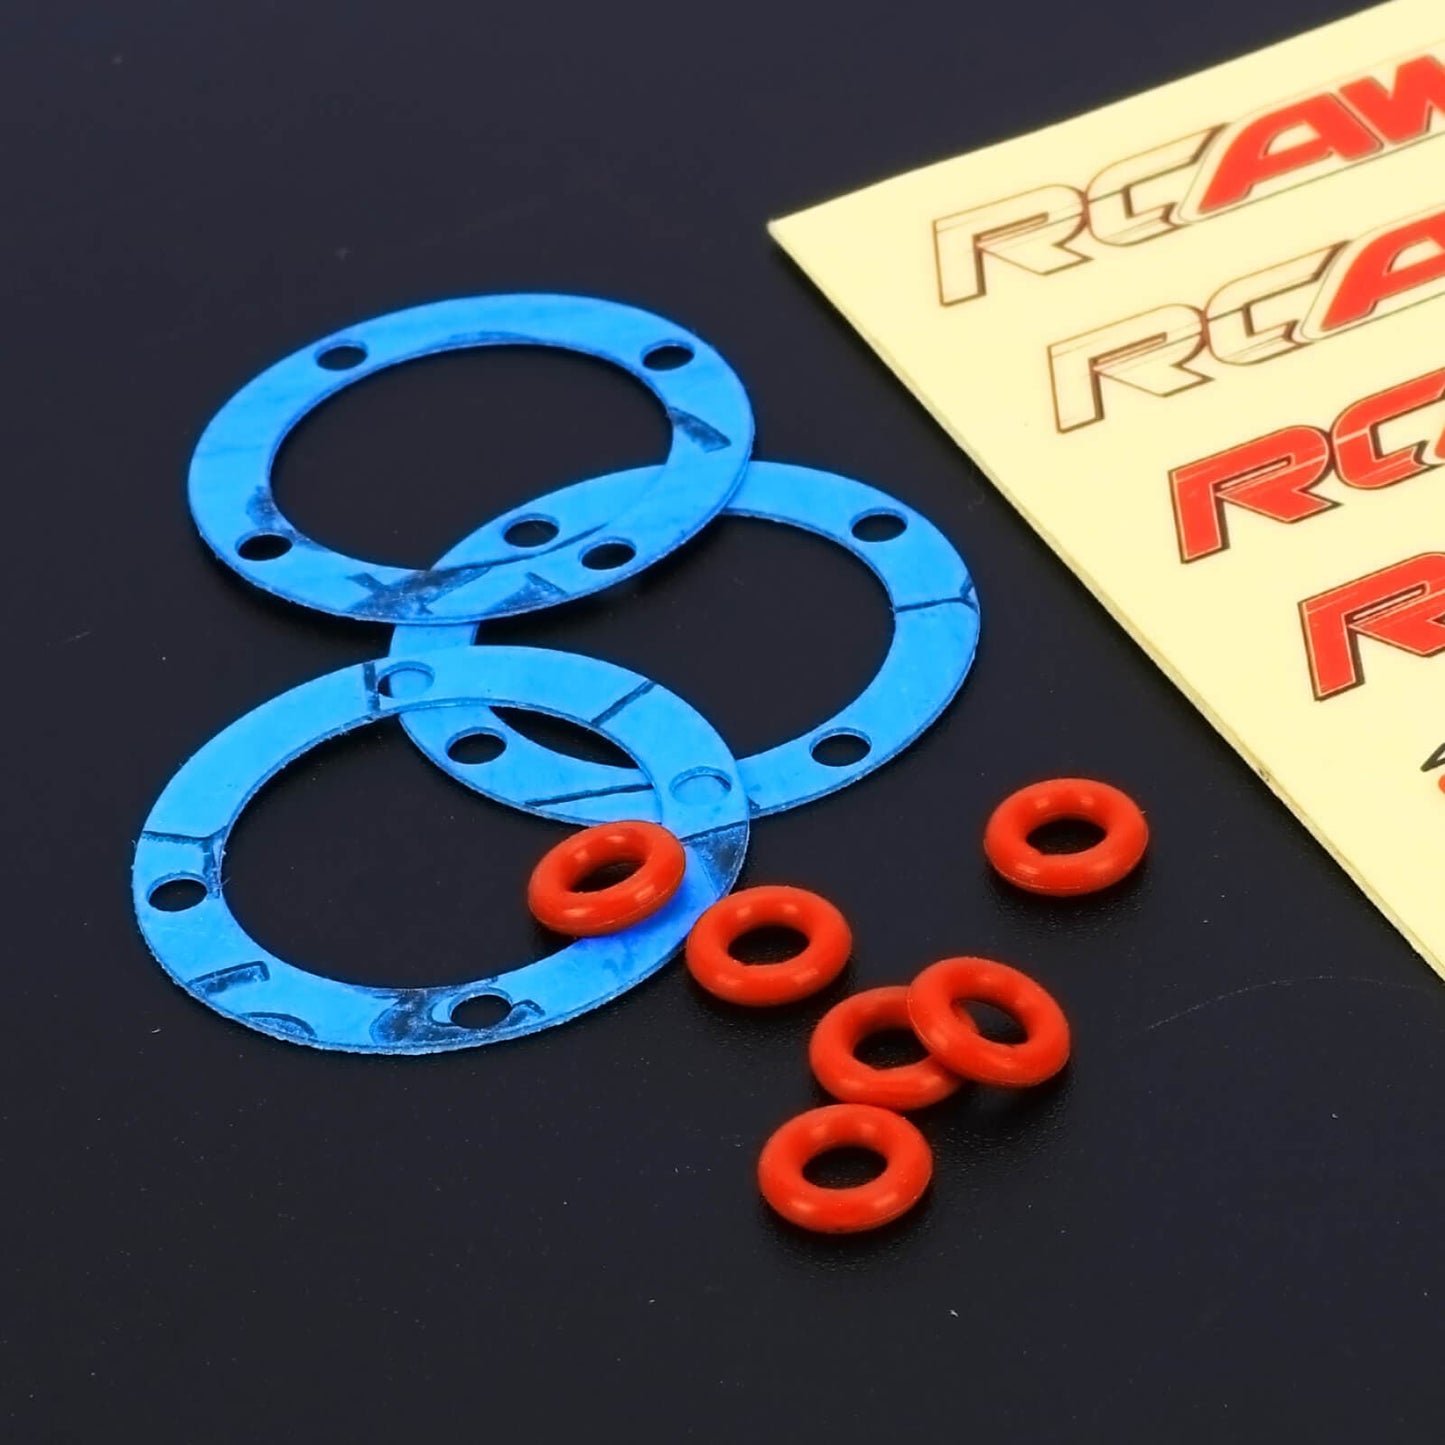 RCAWD LOSI 1/8 LMT Sku RCAWD Losi LMT Upgrades Outdrive O-rings and Diff Gaskets